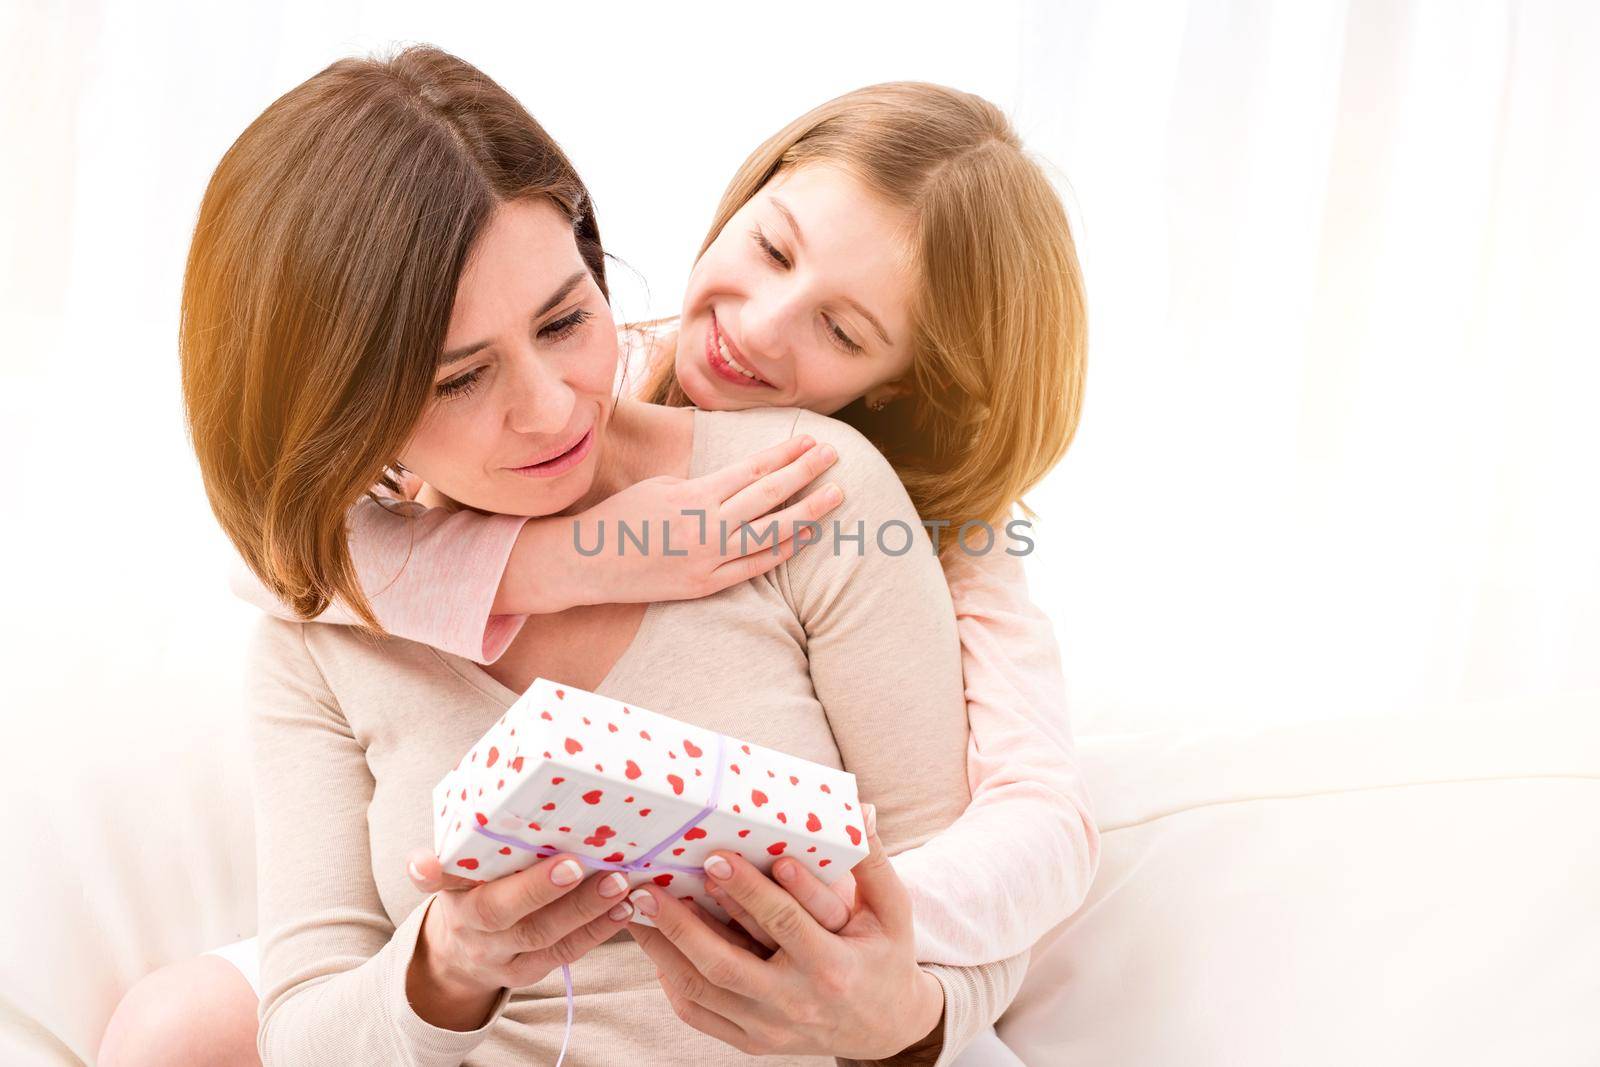 Happy Mother's Day, happy woman's day, happy birthday. Beautiful little girl giving her mother small wrapped gift box. Daughter embracing and congratulating her mum